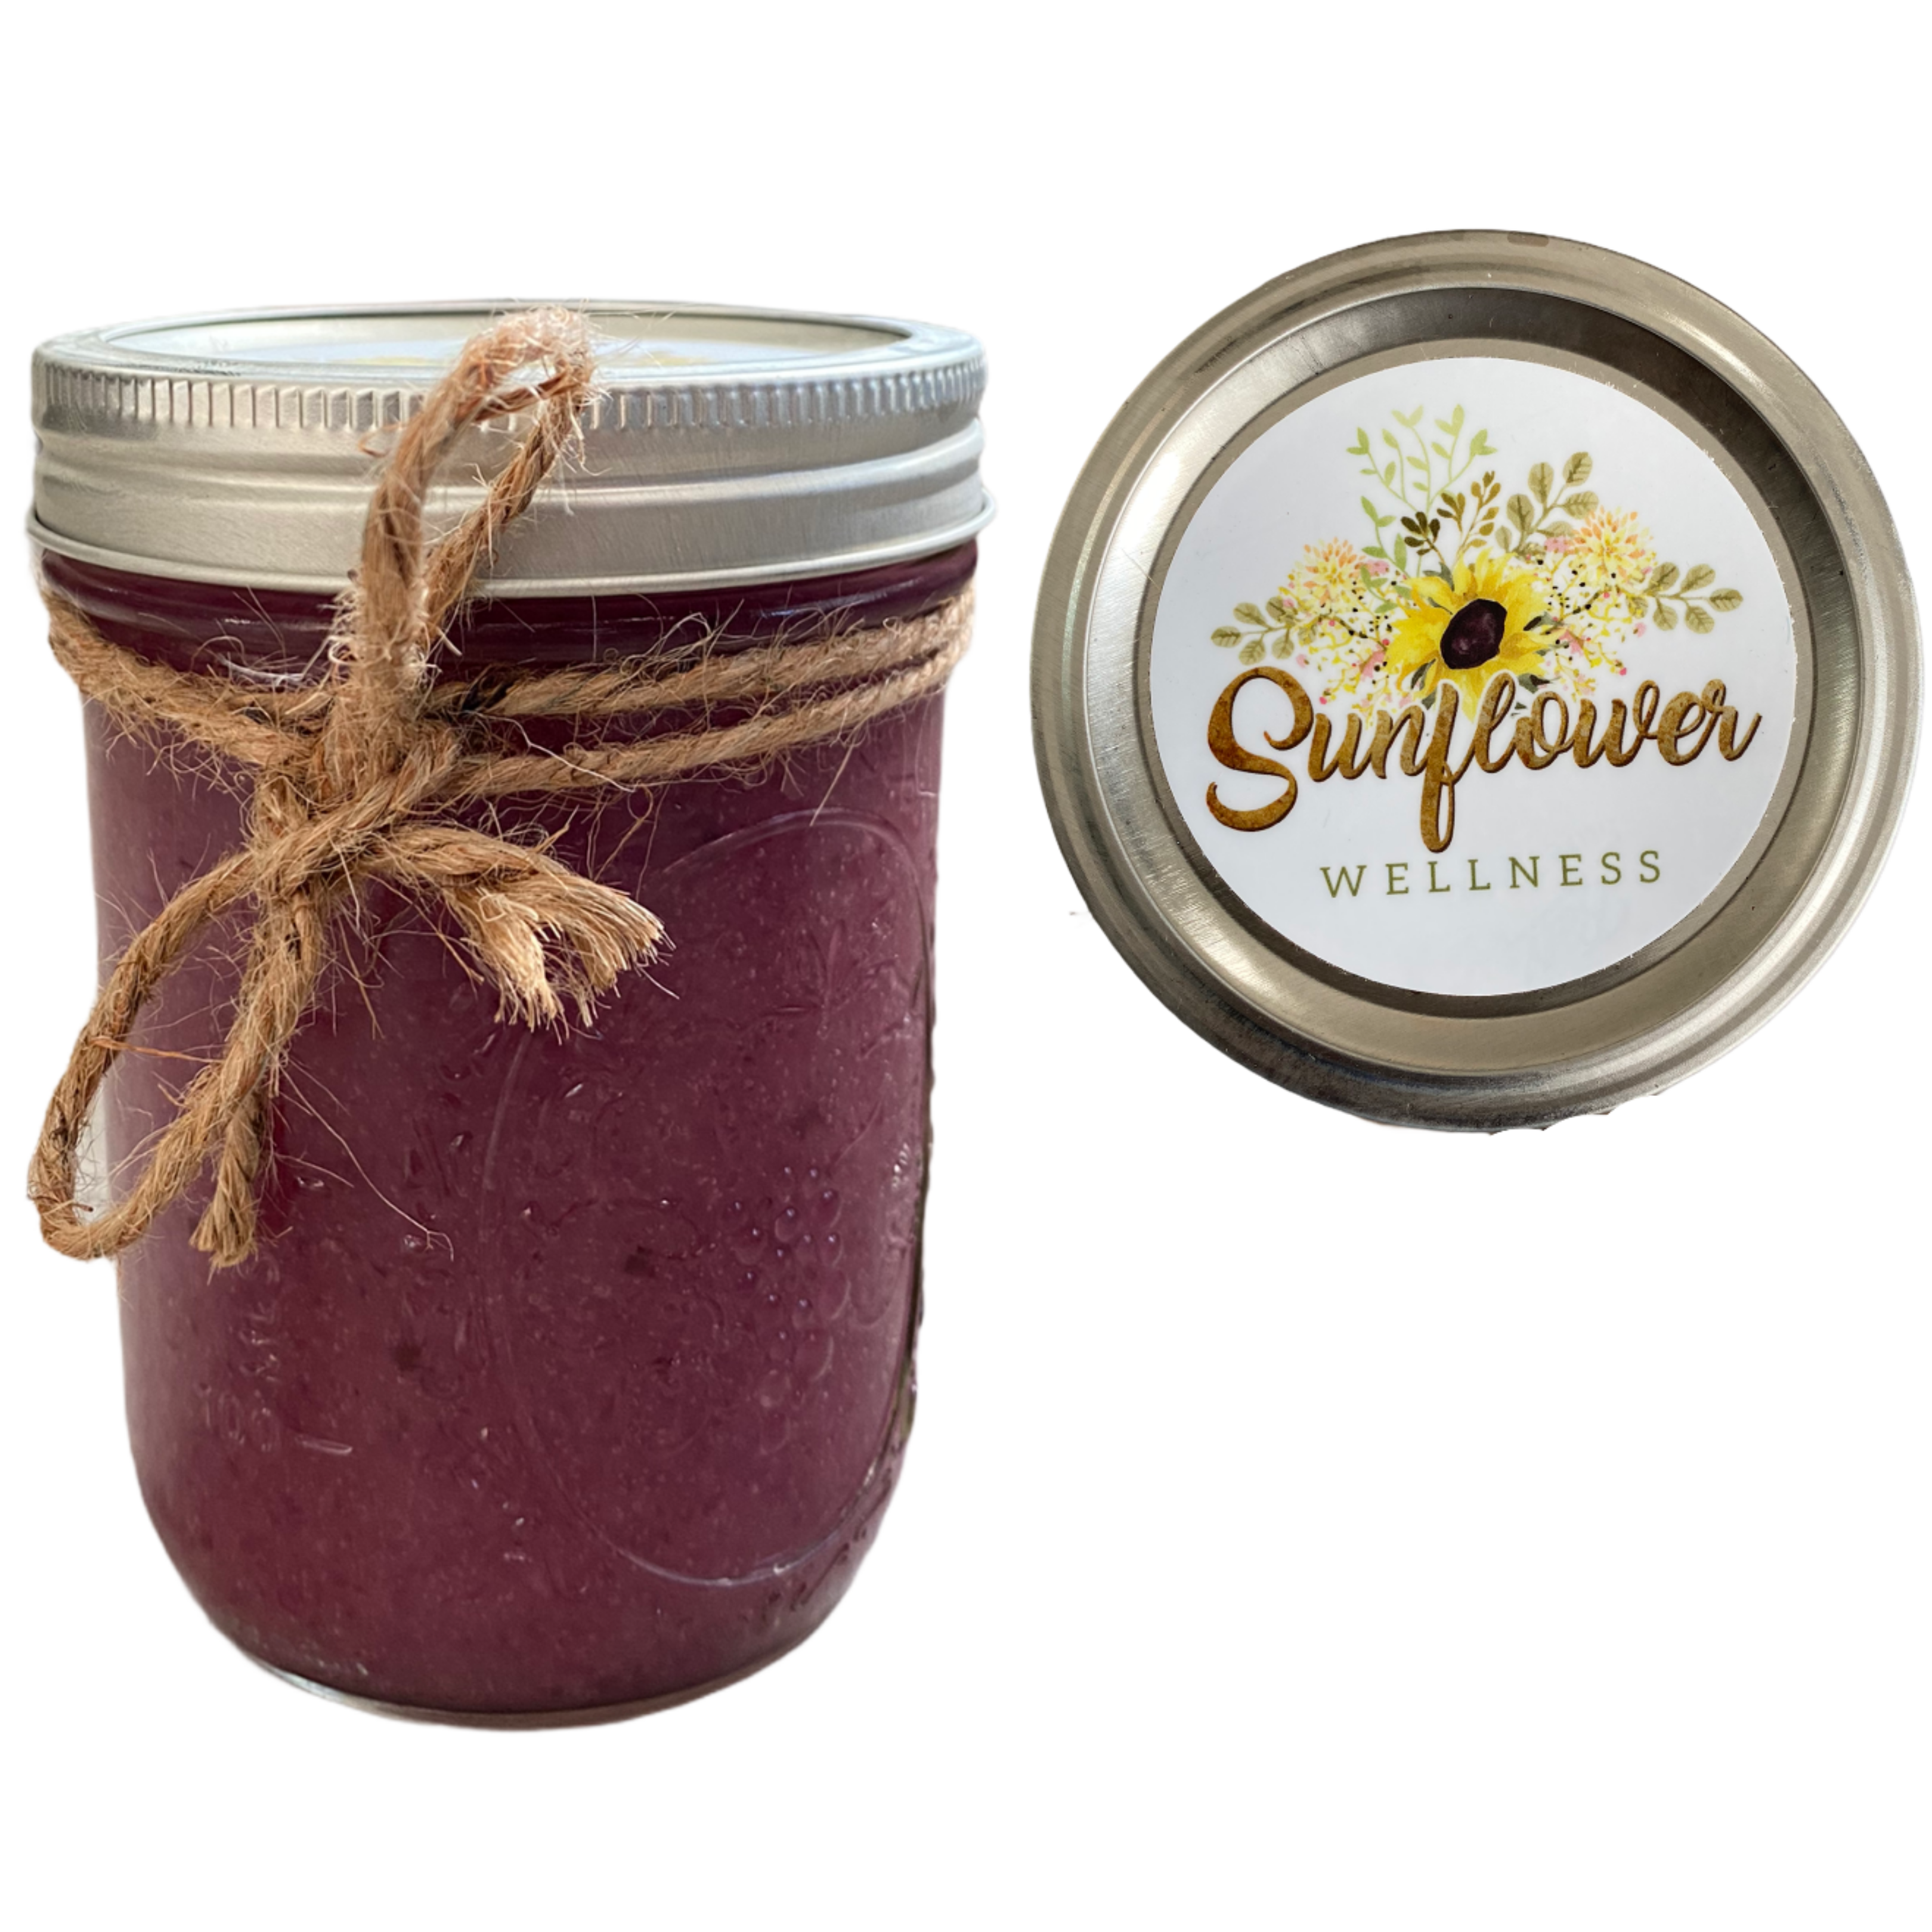 Purple sea moss gel made from wildcrafted seamoss harvested in st. lucia.